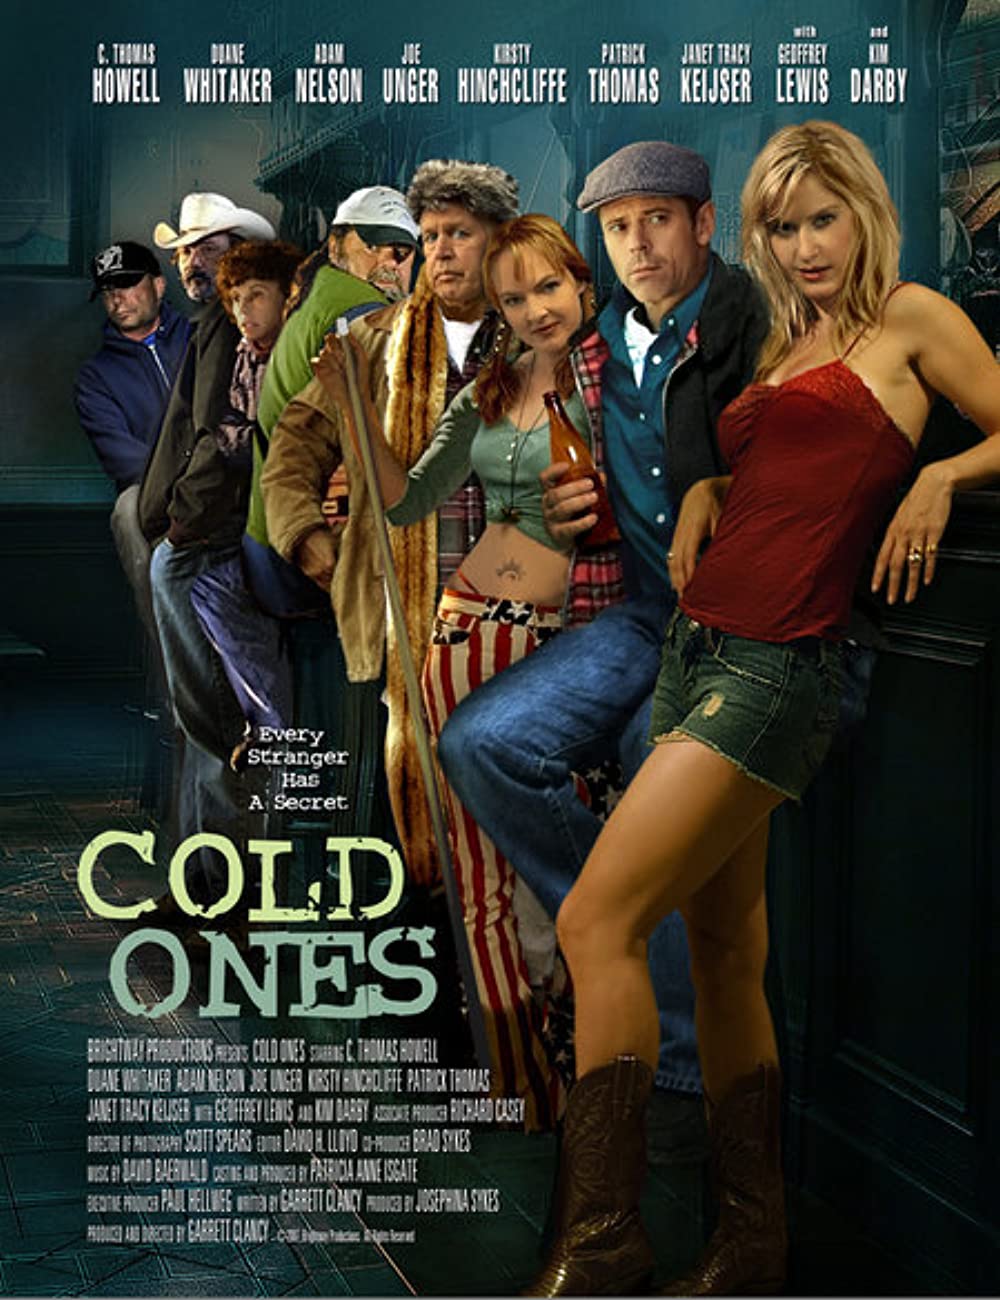 Movie Reviews for Writers: Cold Ones